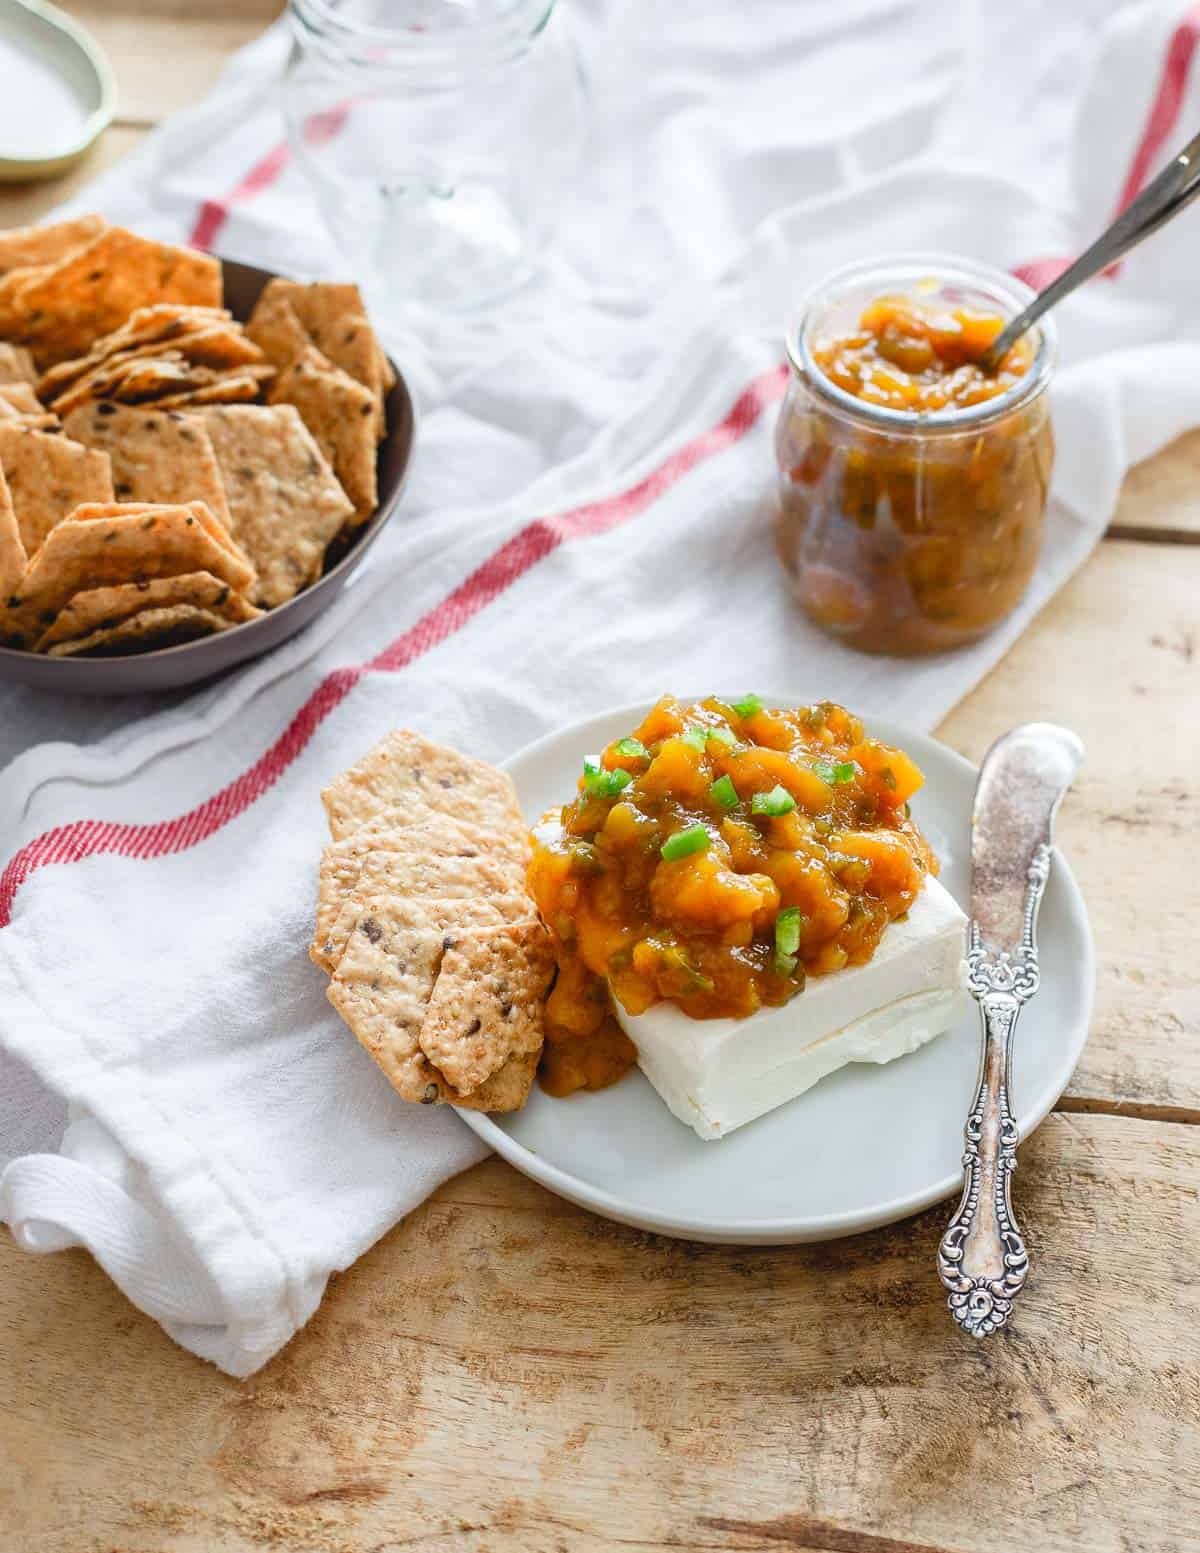 This jalapeno mango jam is the perfect balance of sweet and spice. It's equally delicious with some soft cheese and crackers as it is swirled in some yogurt!